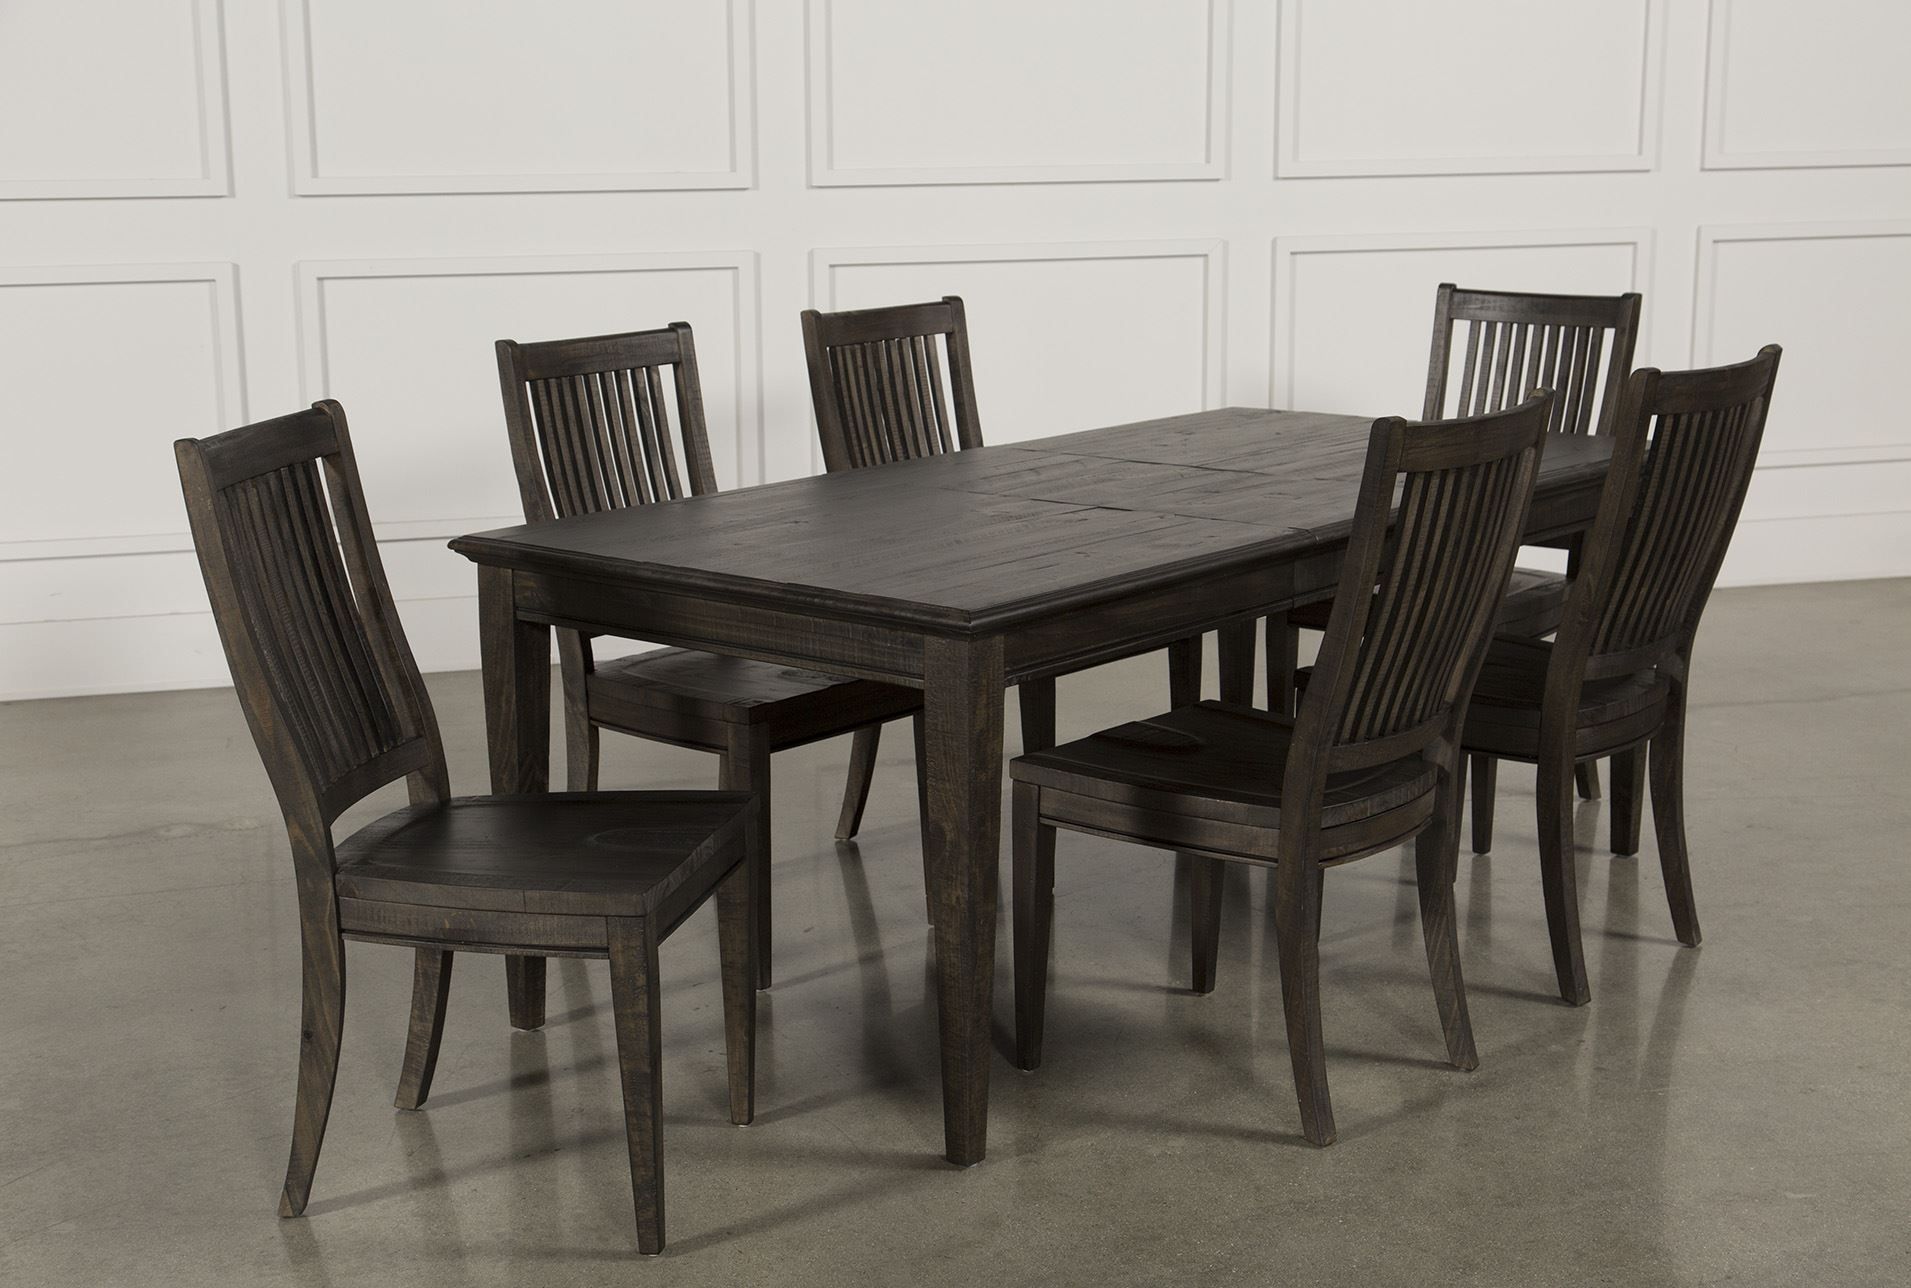 Valencia 64 Inch 7 Piece Extension Dining Set | Furniture For Recent Valencia 72 Inch 7 Piece Dining Sets (View 2 of 20)